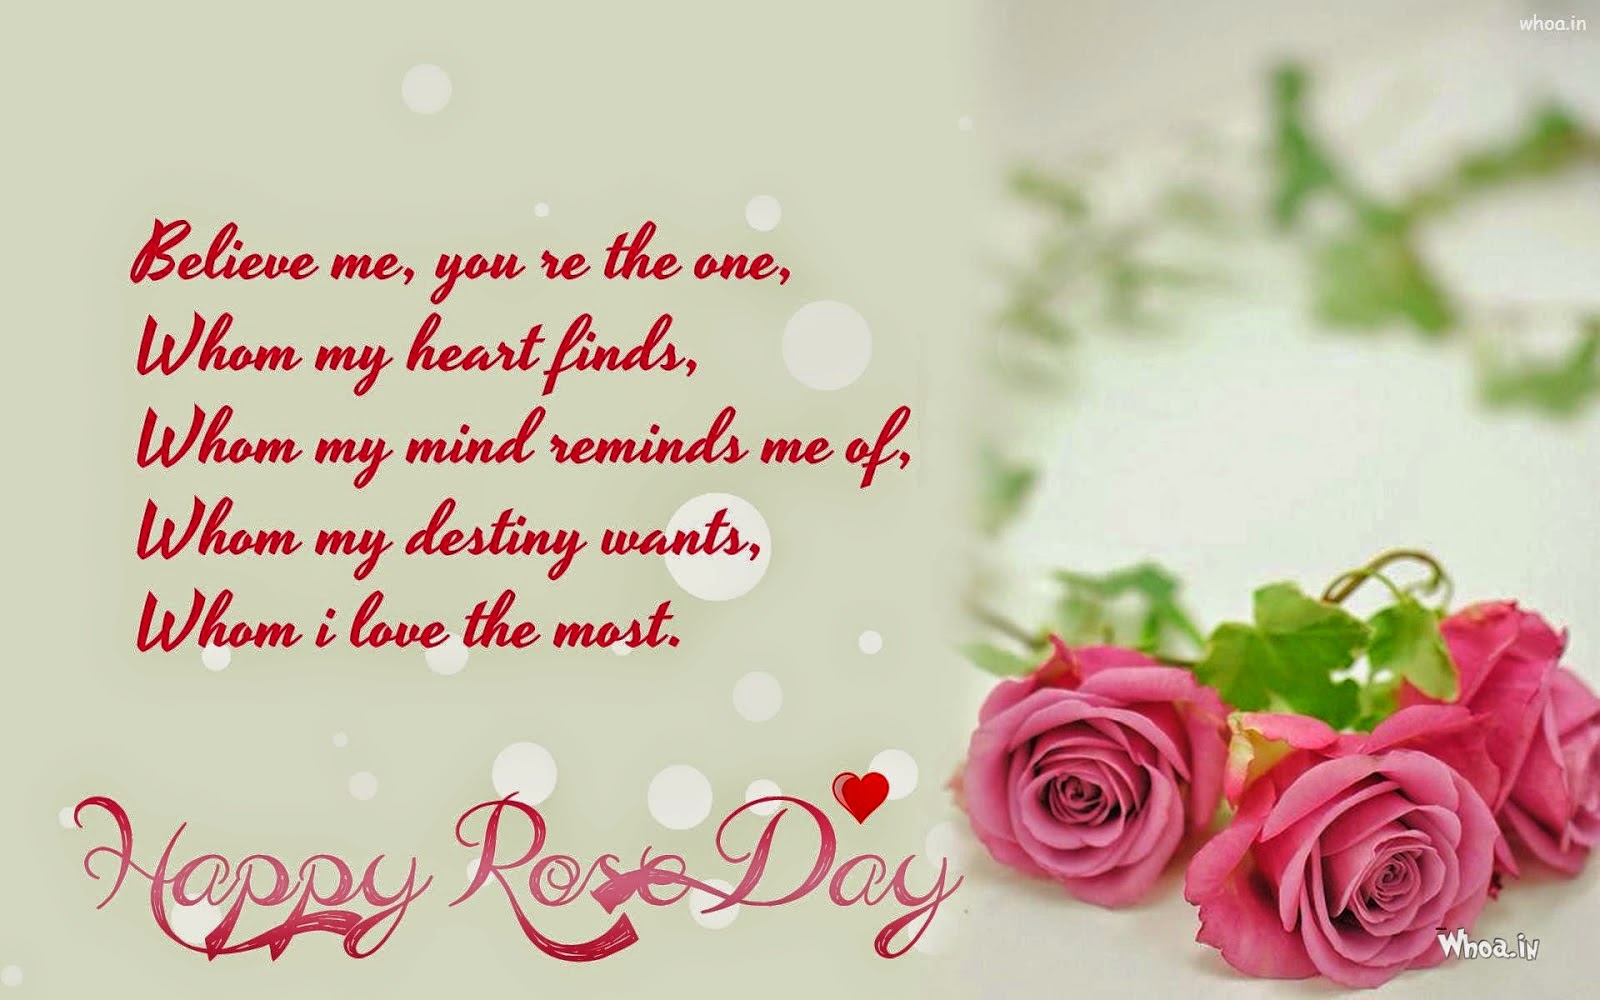 Rose Day 2019 Images - Rose Day Quotes For Boyfriend - HD Wallpaper 